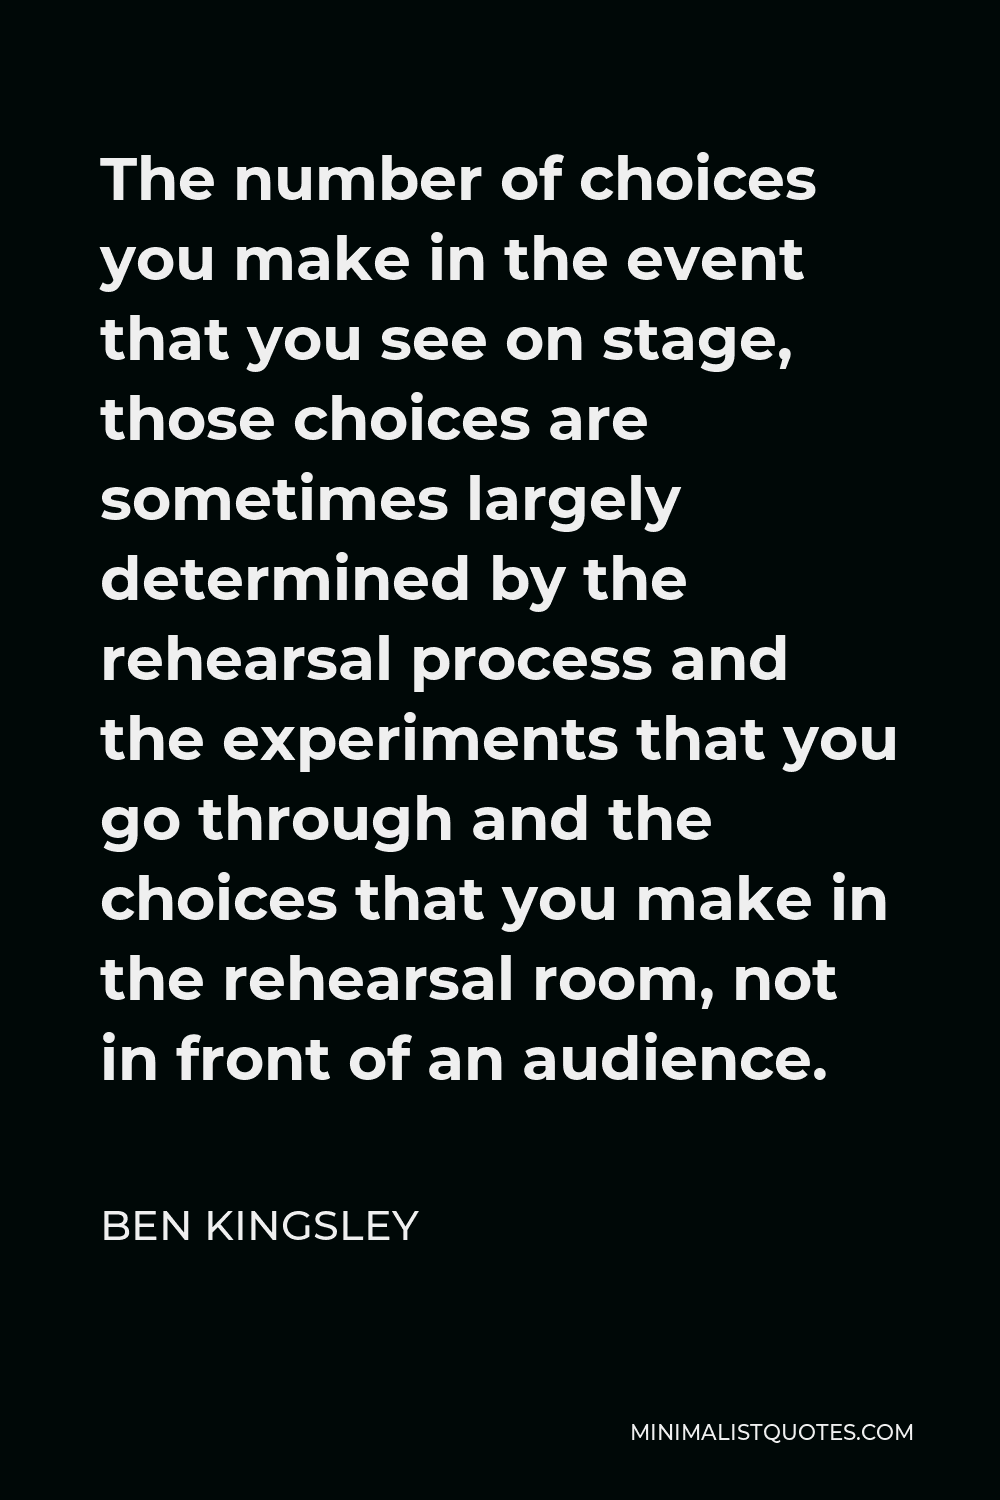 Ben Kingsley Quote - The number of choices you make in the event that you see on stage, those choices are sometimes largely determined by the rehearsal process and the experiments that you go through and the choices that you make in the rehearsal room, not in front of an audience.